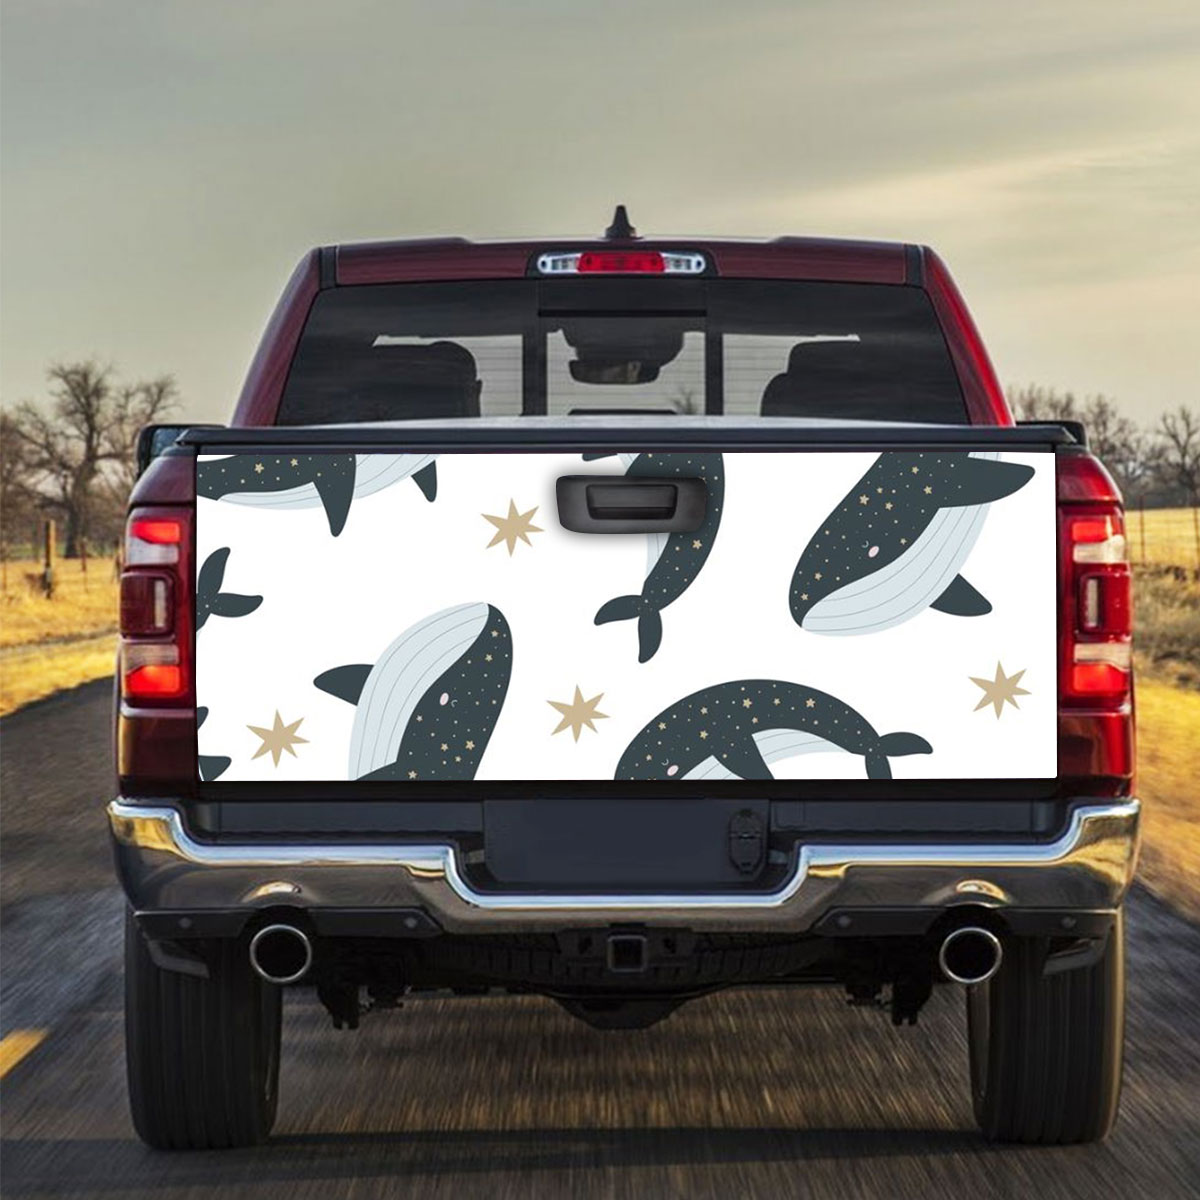 Star Narhwhal Whale Truck Bed Decal